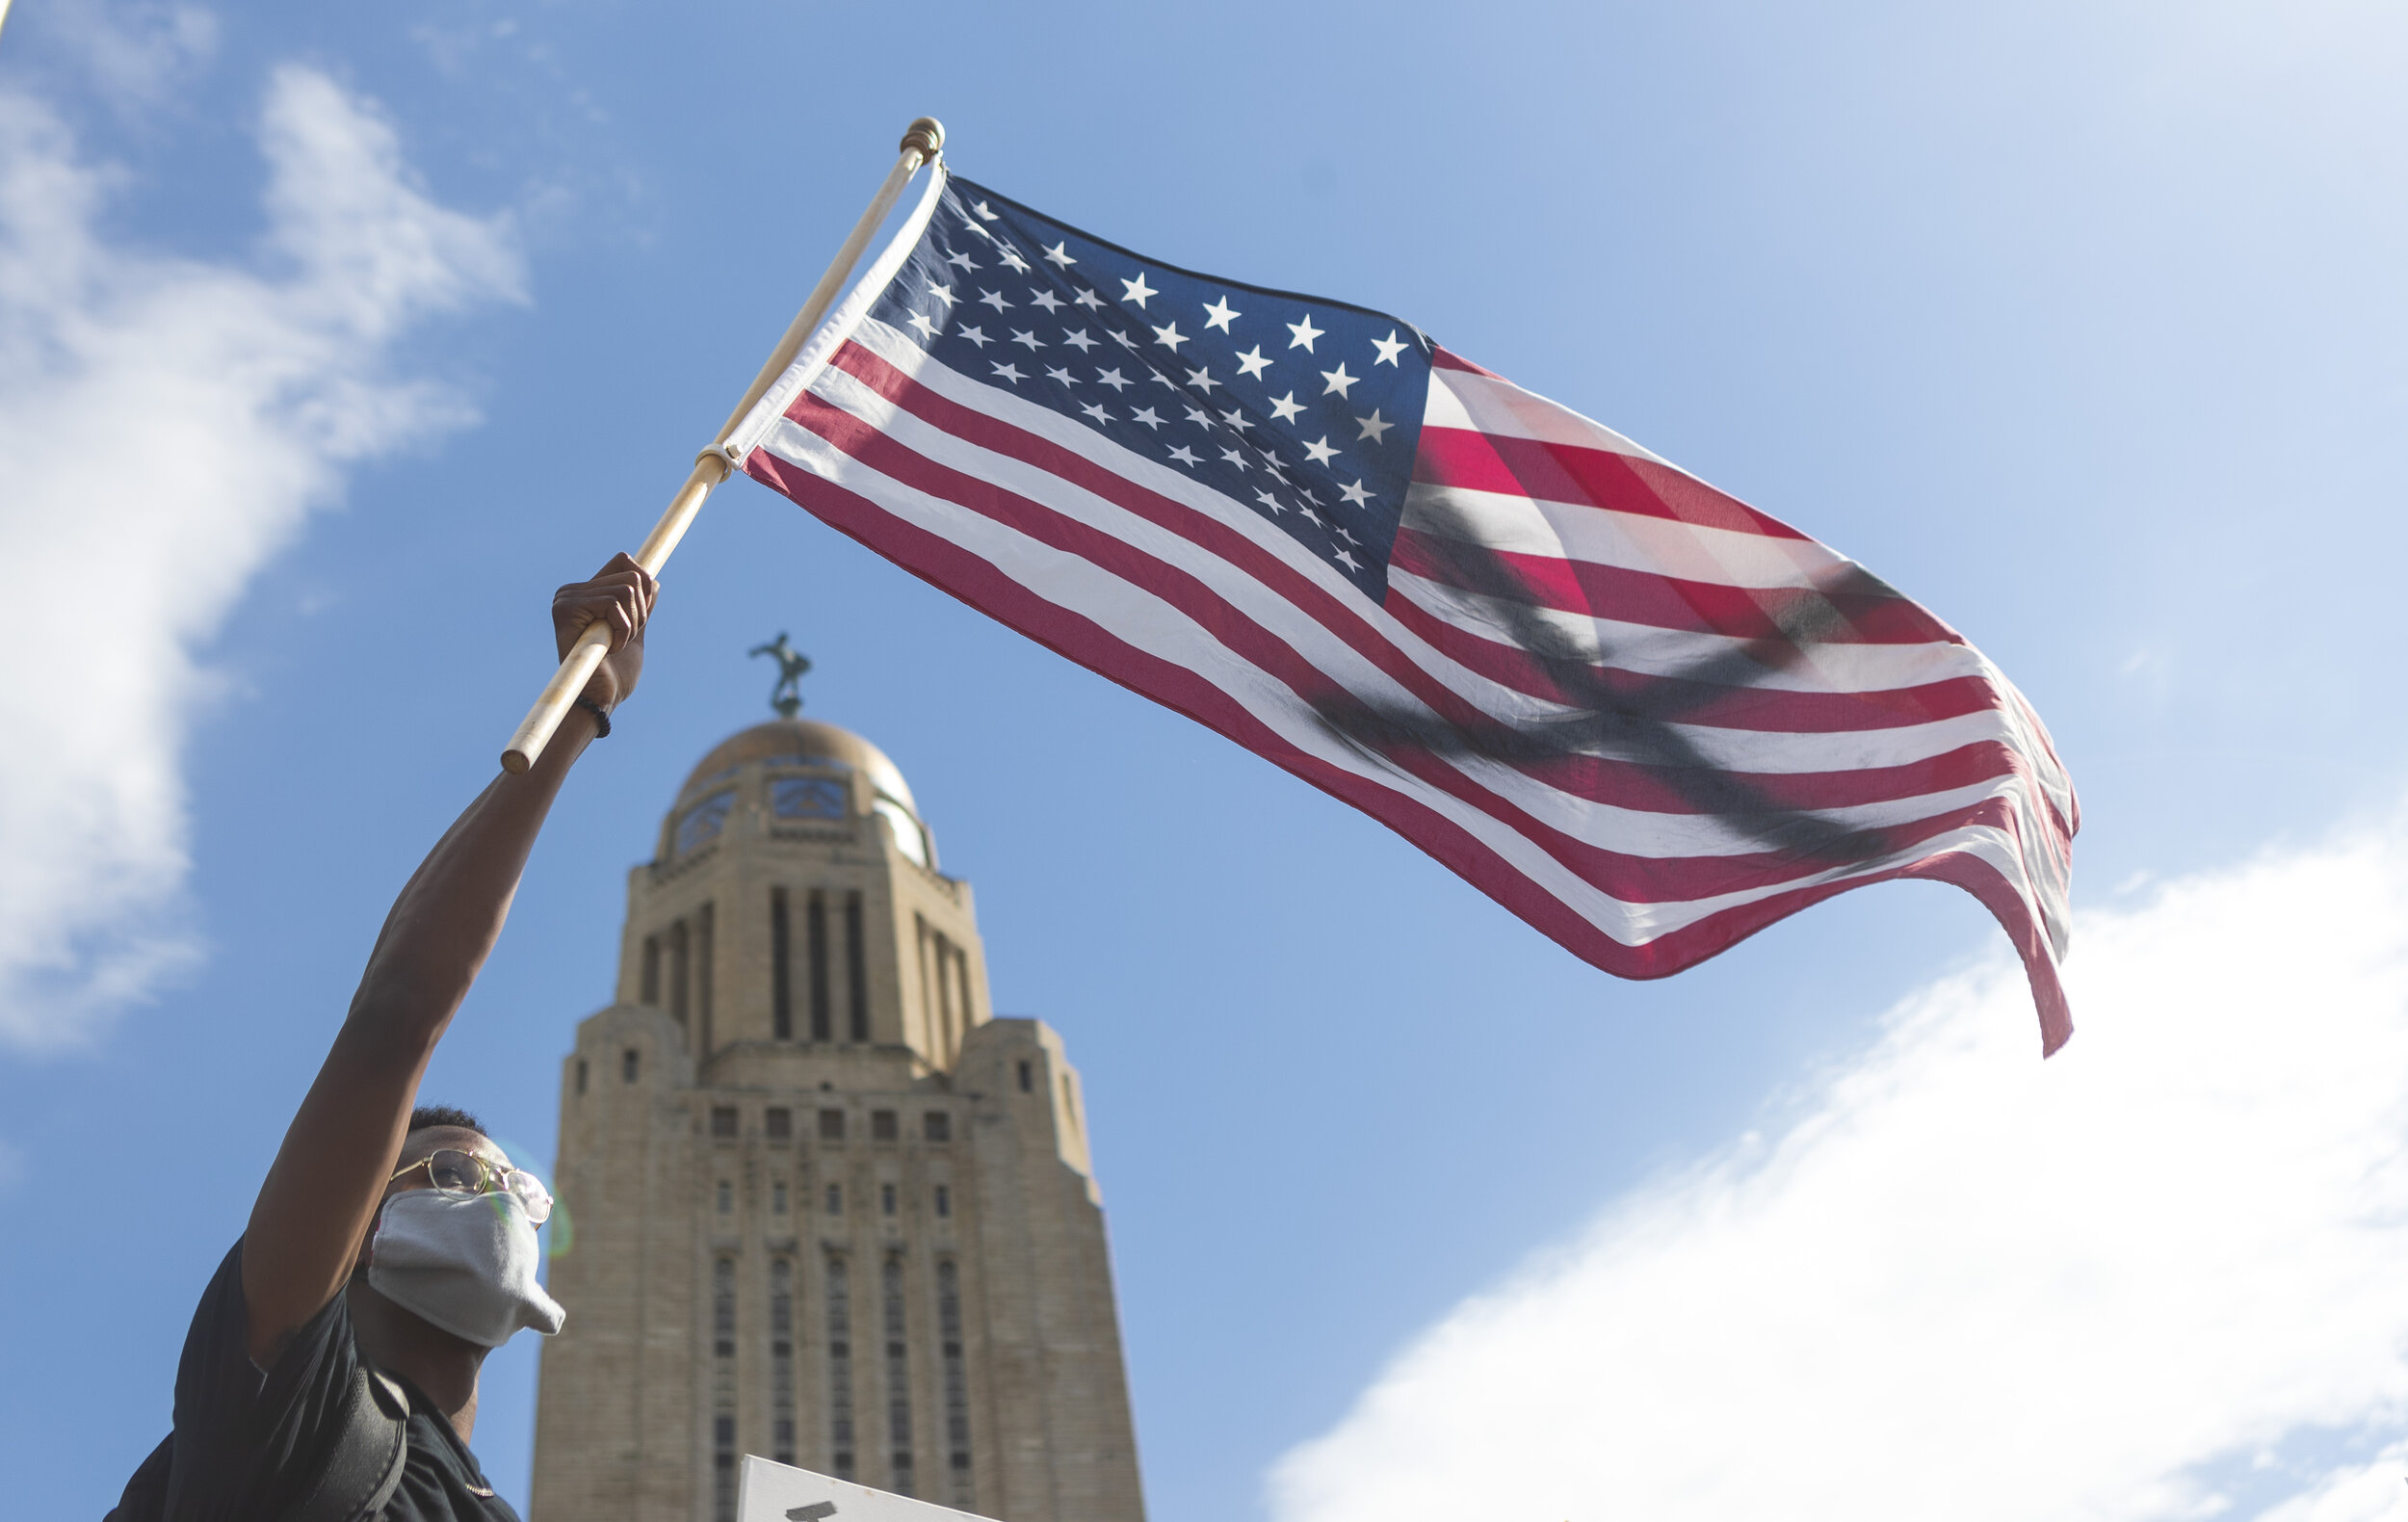  Temi Onayemi waves an American flag with an"X" painted on it in protest during a protest against police violence on Sunday, May 31, 2020, in the Lincoln Mall.  The Protest was one of the most attended protests in Nebraska history with thousands in a